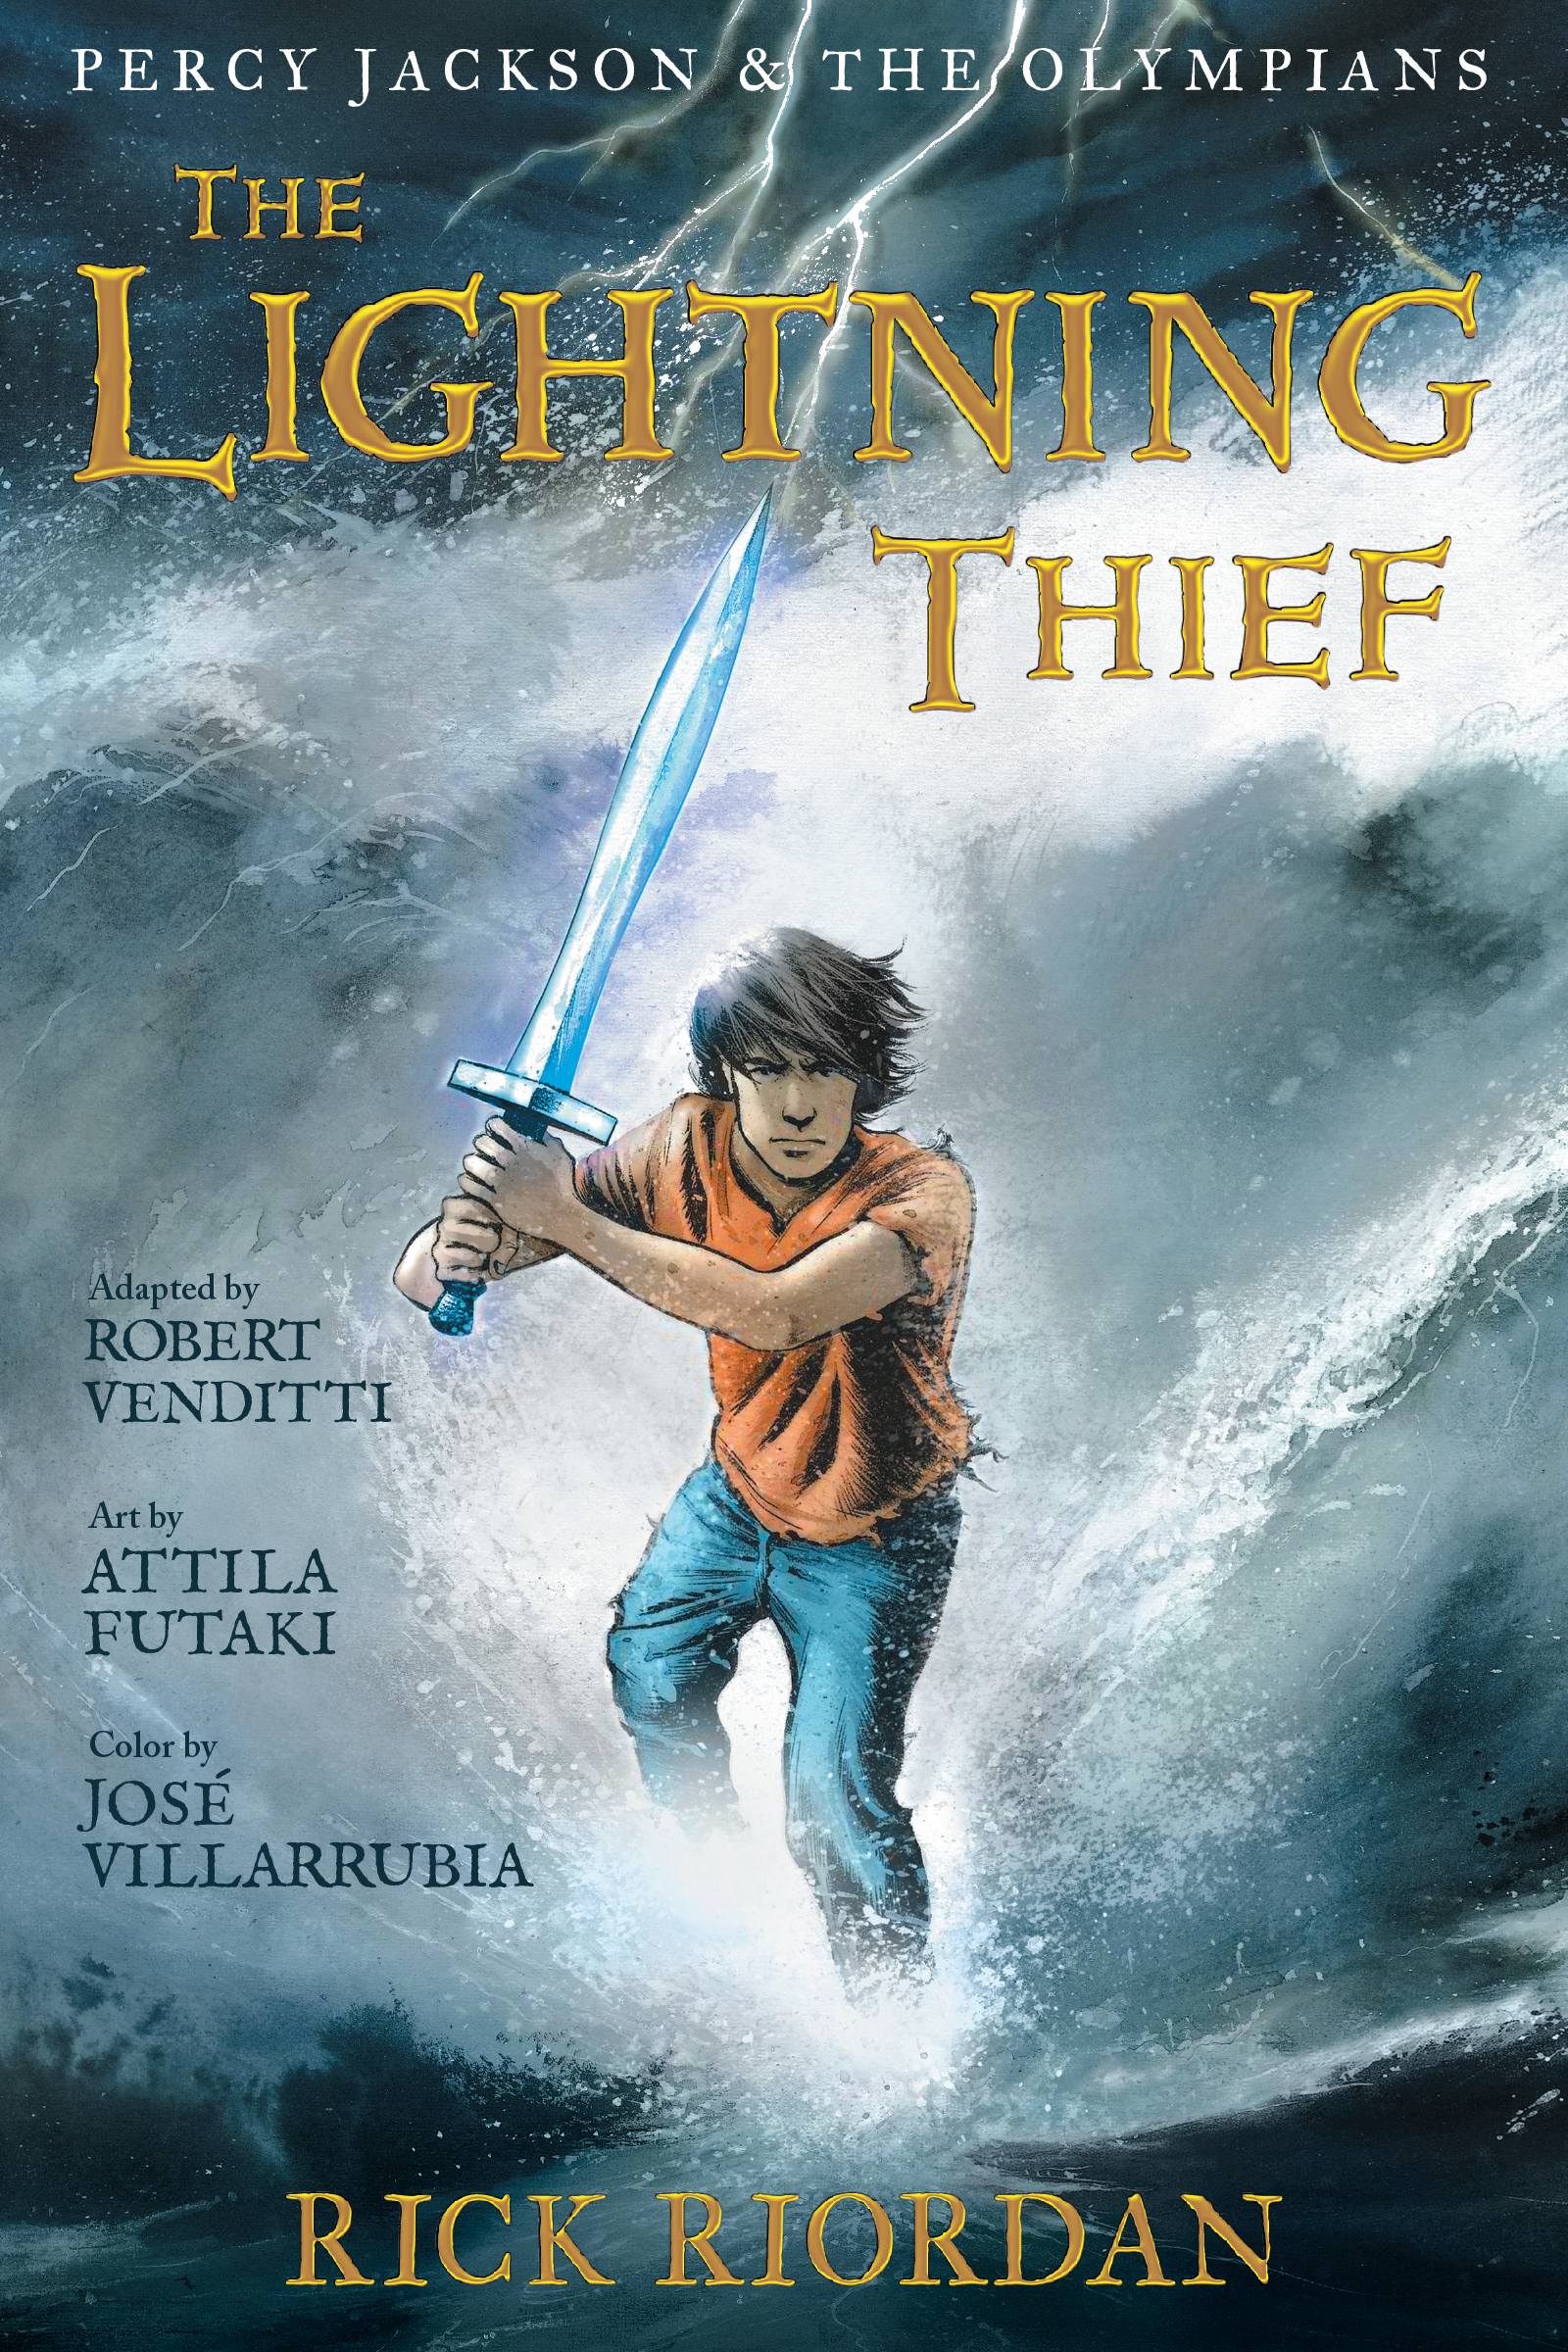 Read online Percy Jackson and the Olympians comic -  Issue # TBP 1 - 1